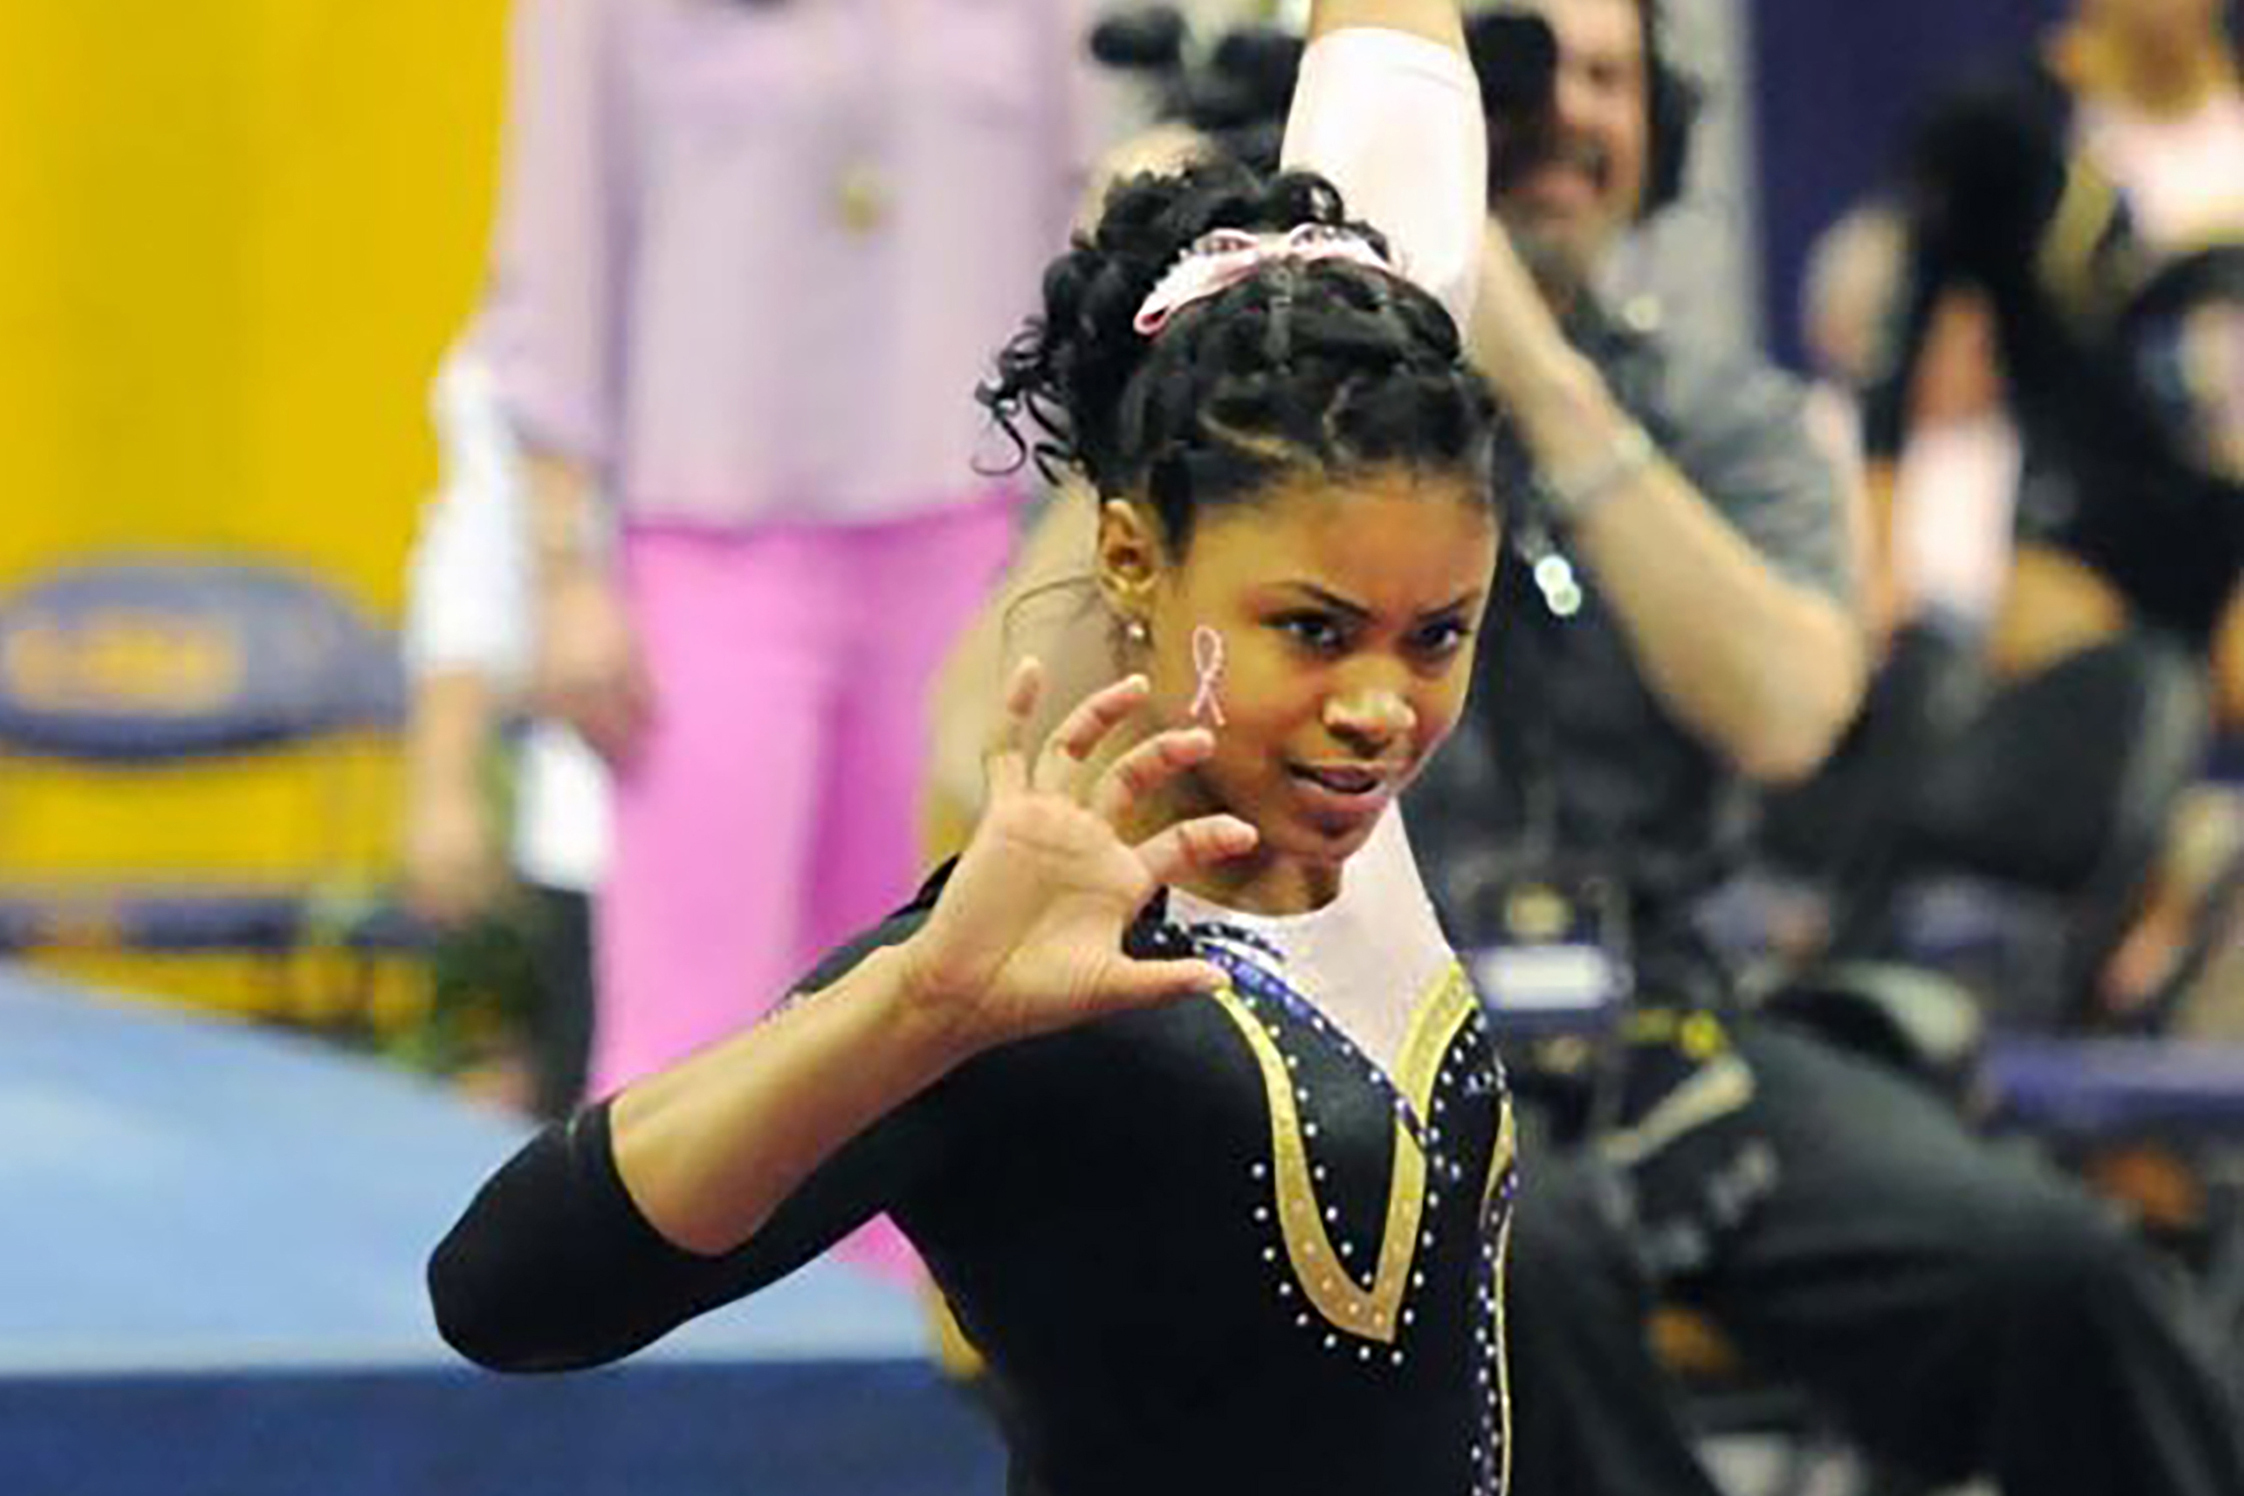 PHOTO: In this March 8, 2013, photo provided by LSU Student Media, LSU senior Britney Taylor finishes her floor routine at a gymnastics event in Baton Rouge, La.